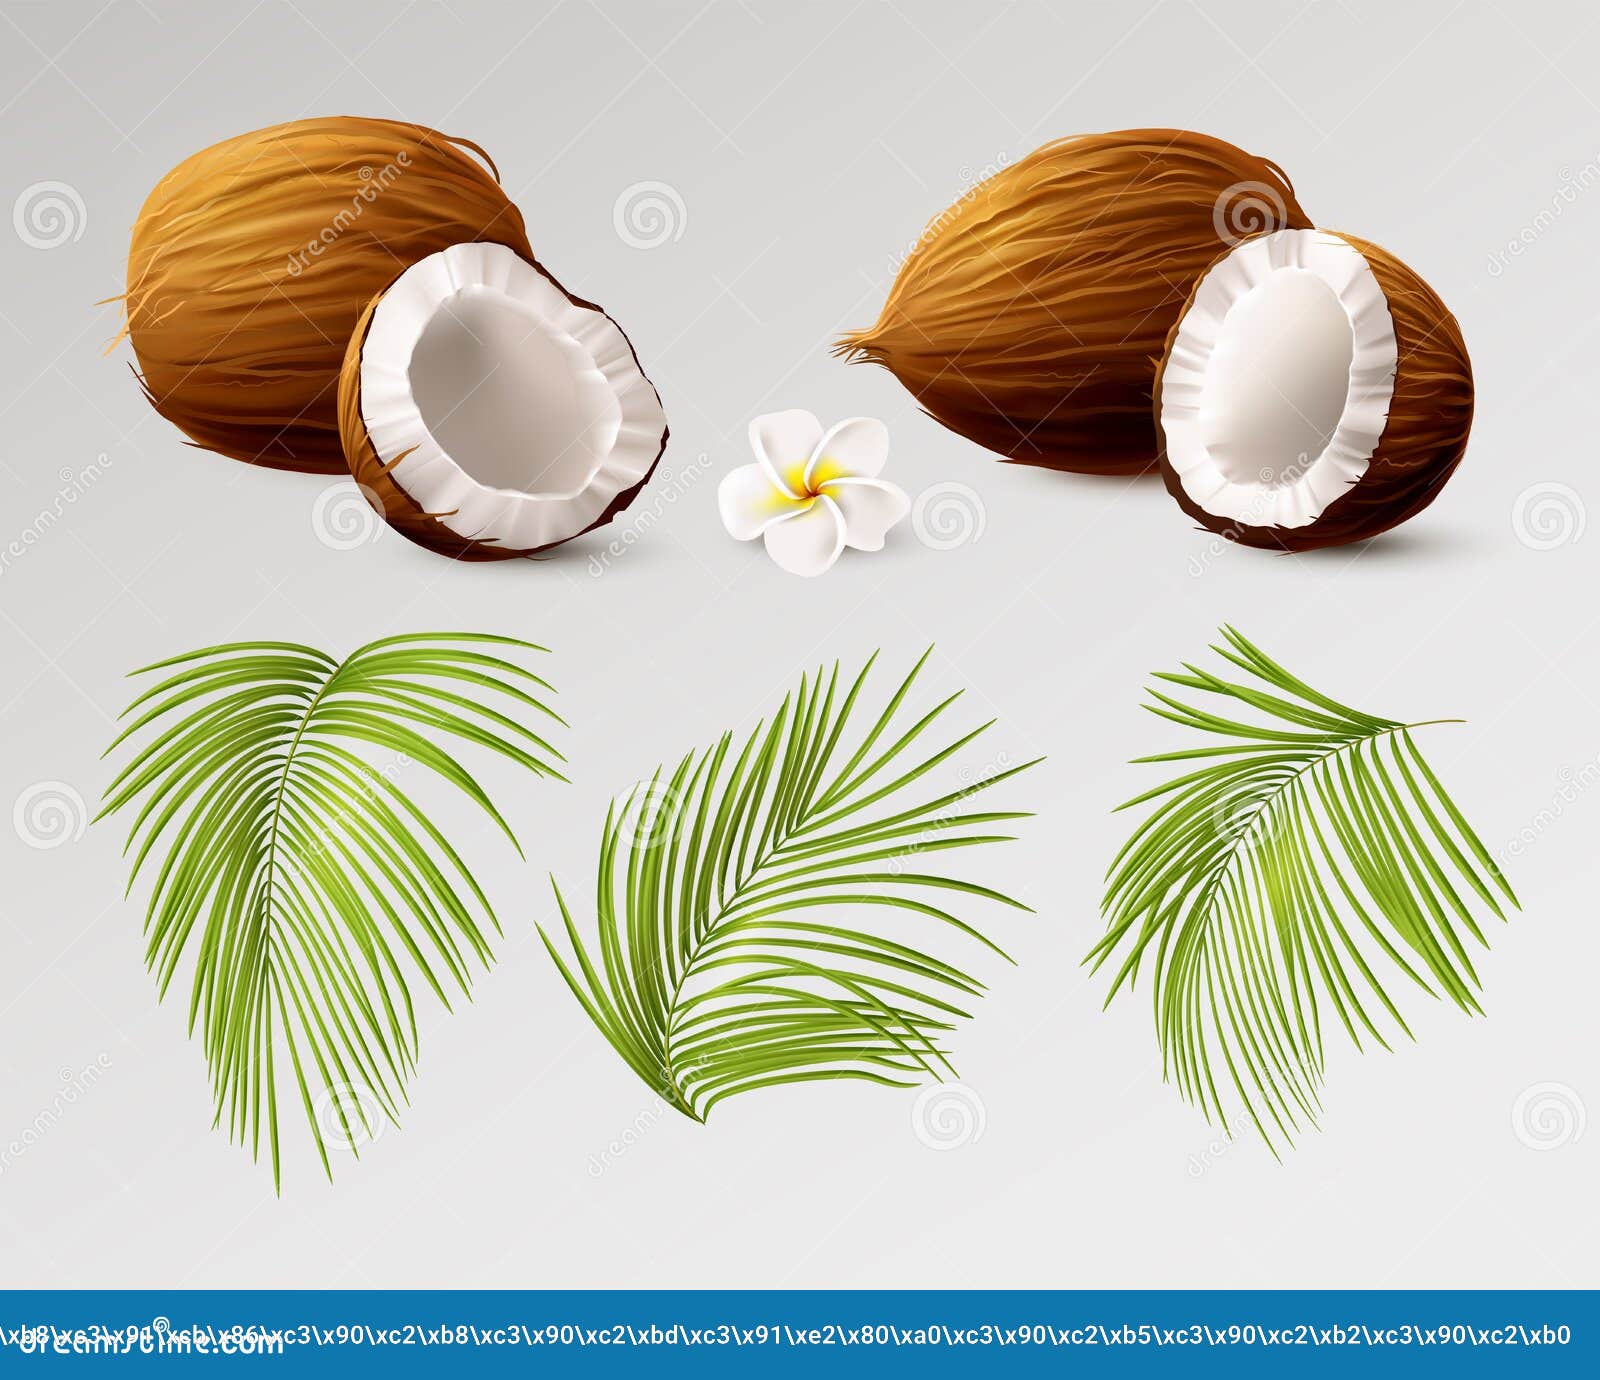 3d Coconut Realistic. Whole and Half Coco Different Side View, Palm ...